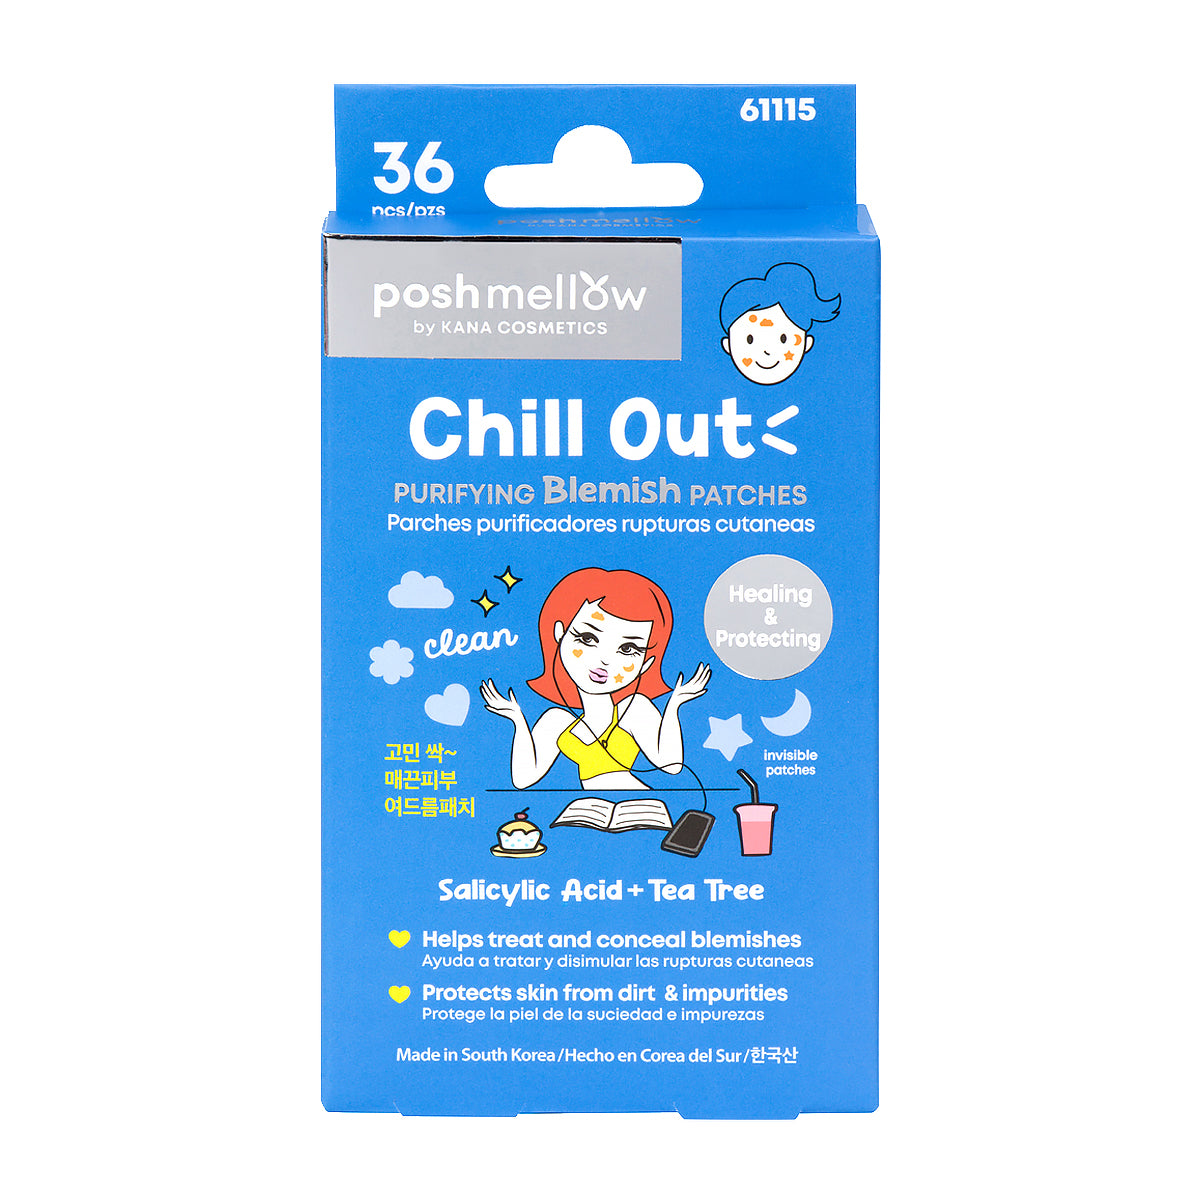 Purifying Blemish Patches (36 pcs): Chill Out